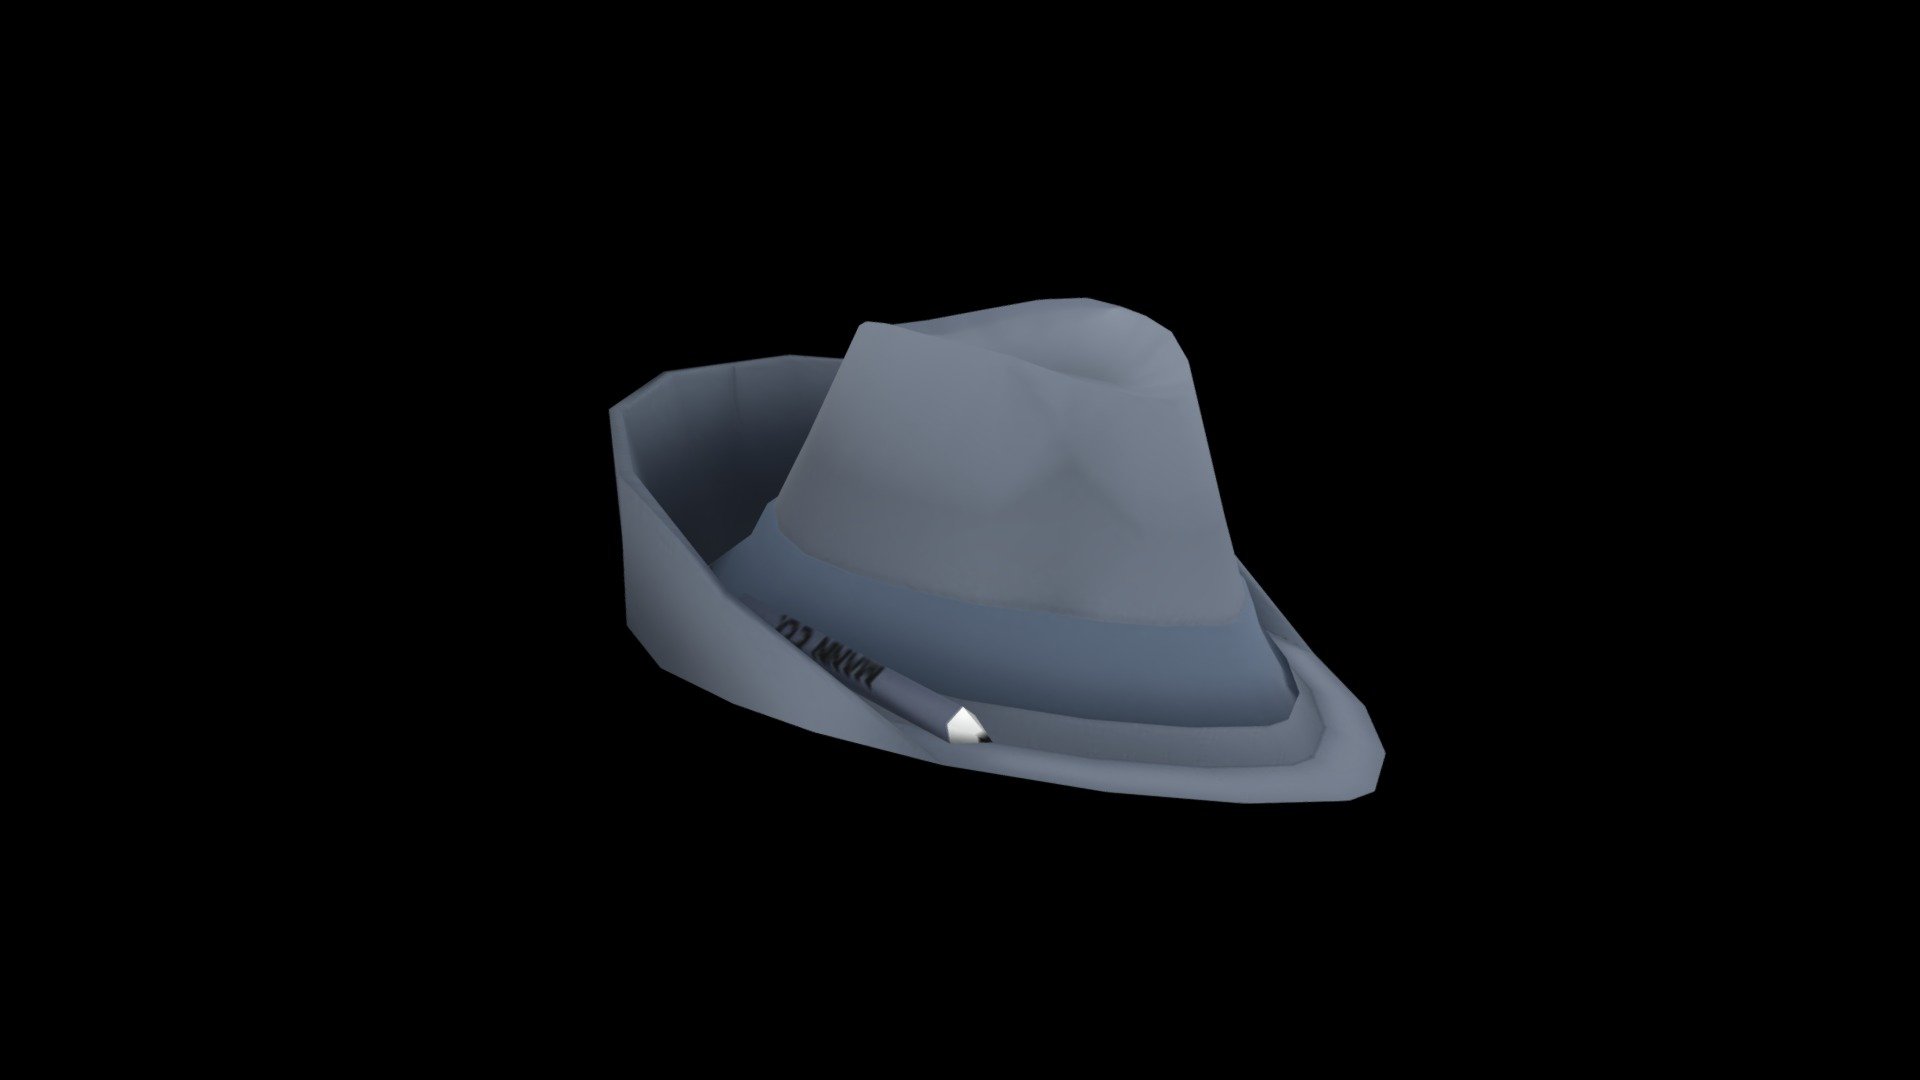 Cosmetic Headgear for Team Fortress 2.
Another one Fedora for Spy to wear, but this time, he is a Reporter!

Created special for 72hr TF2Jam
Check it on Steam: https://steamcommunity.com/sharedfiles/filedetails/?id=1824922811 - Fancy Reportage - 3D model by sanekogon 3d model